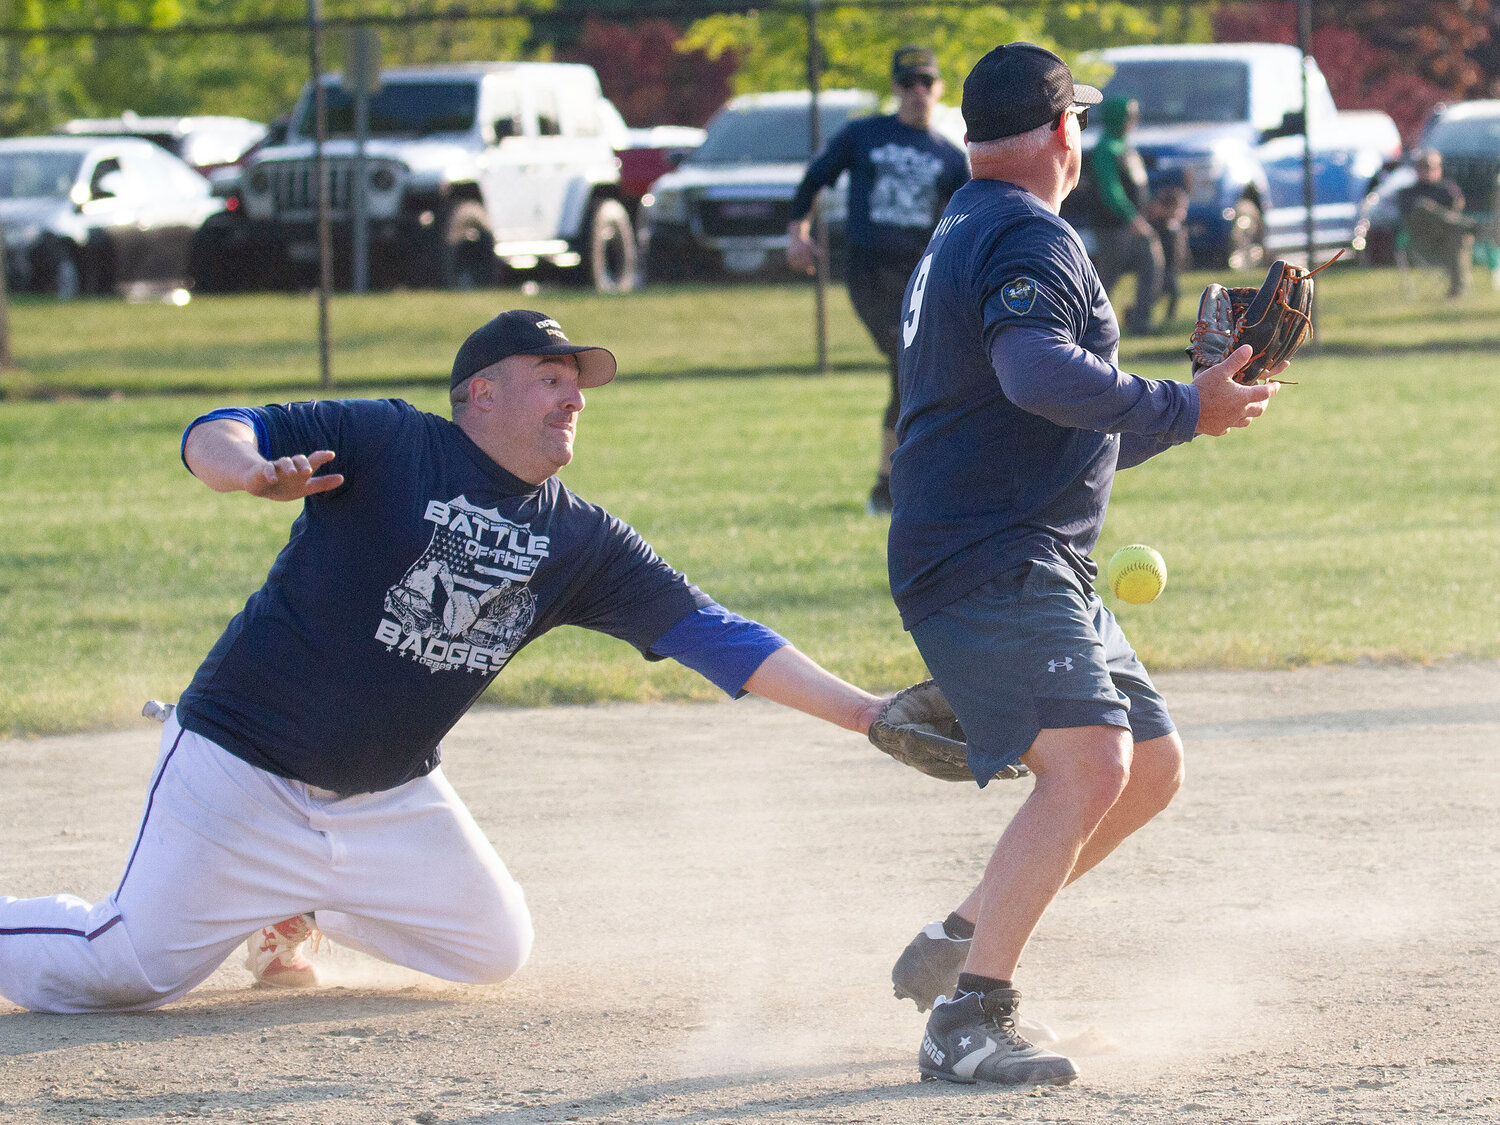 Brandon Correia attempts to grab a grounder bobbled by shortstop Scott McNally.